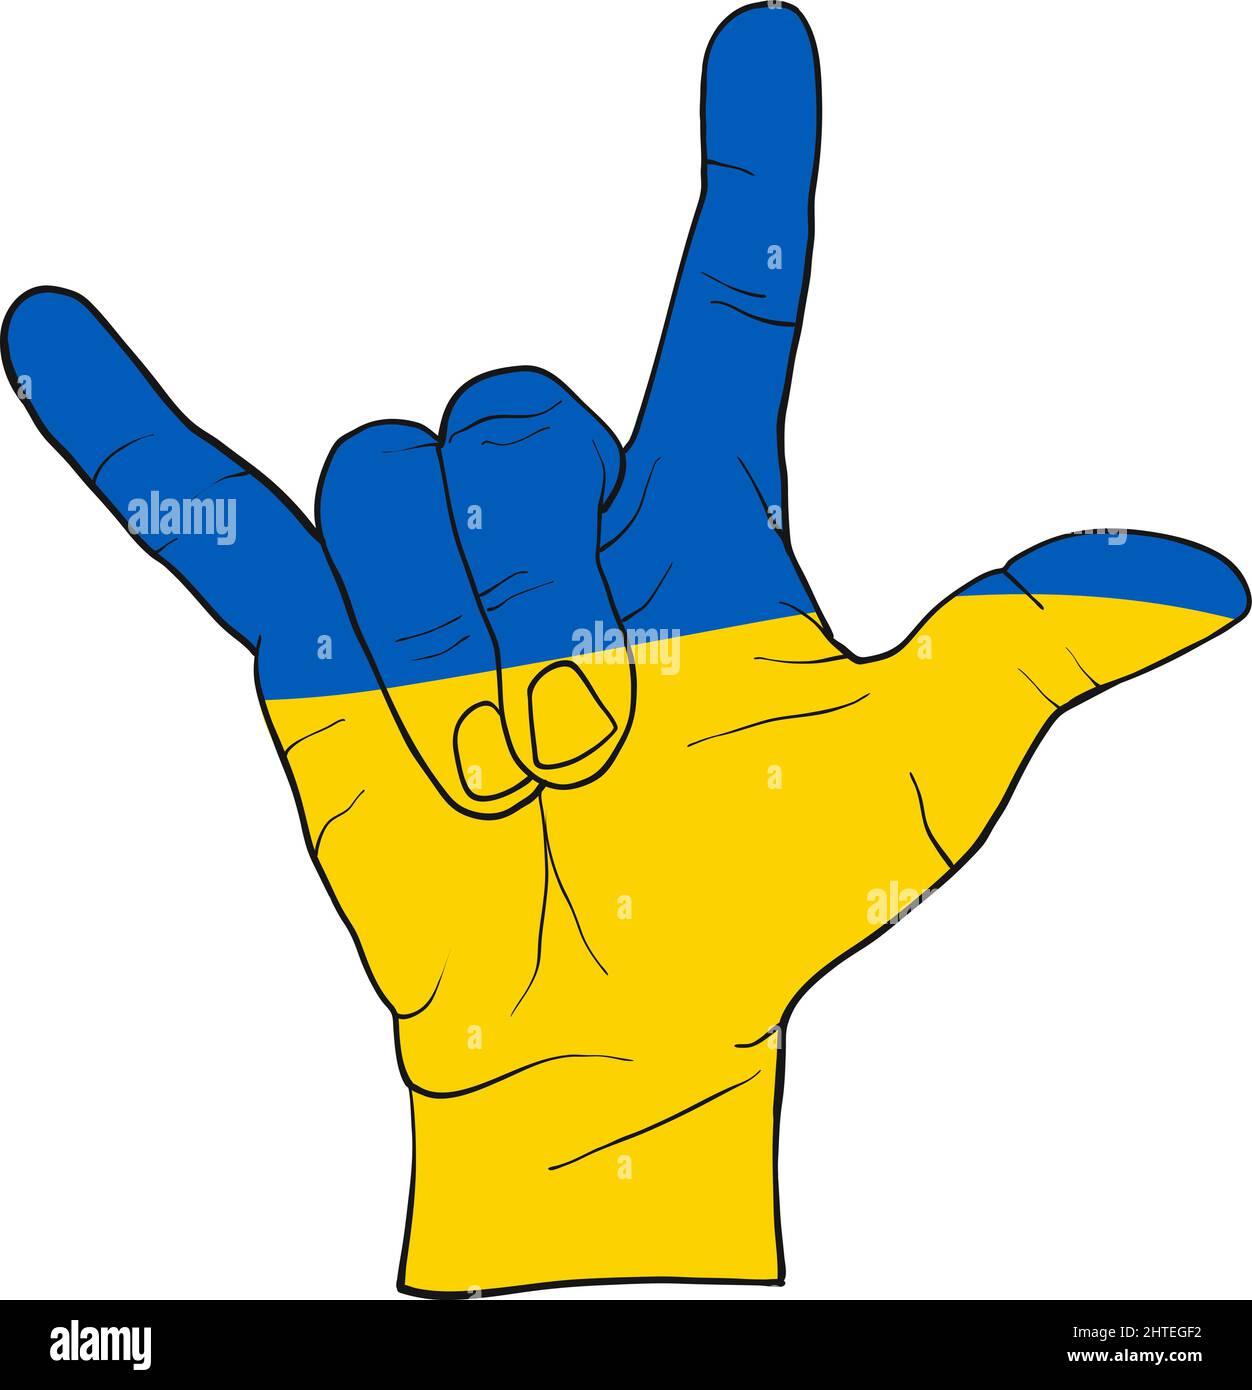 Three finger hand freedom icon. Support icon for Kyiv and Ukraine people. Stay Strong together. Patriotic symbol, icon.-SupplementalCategories+=Images Stock Vector